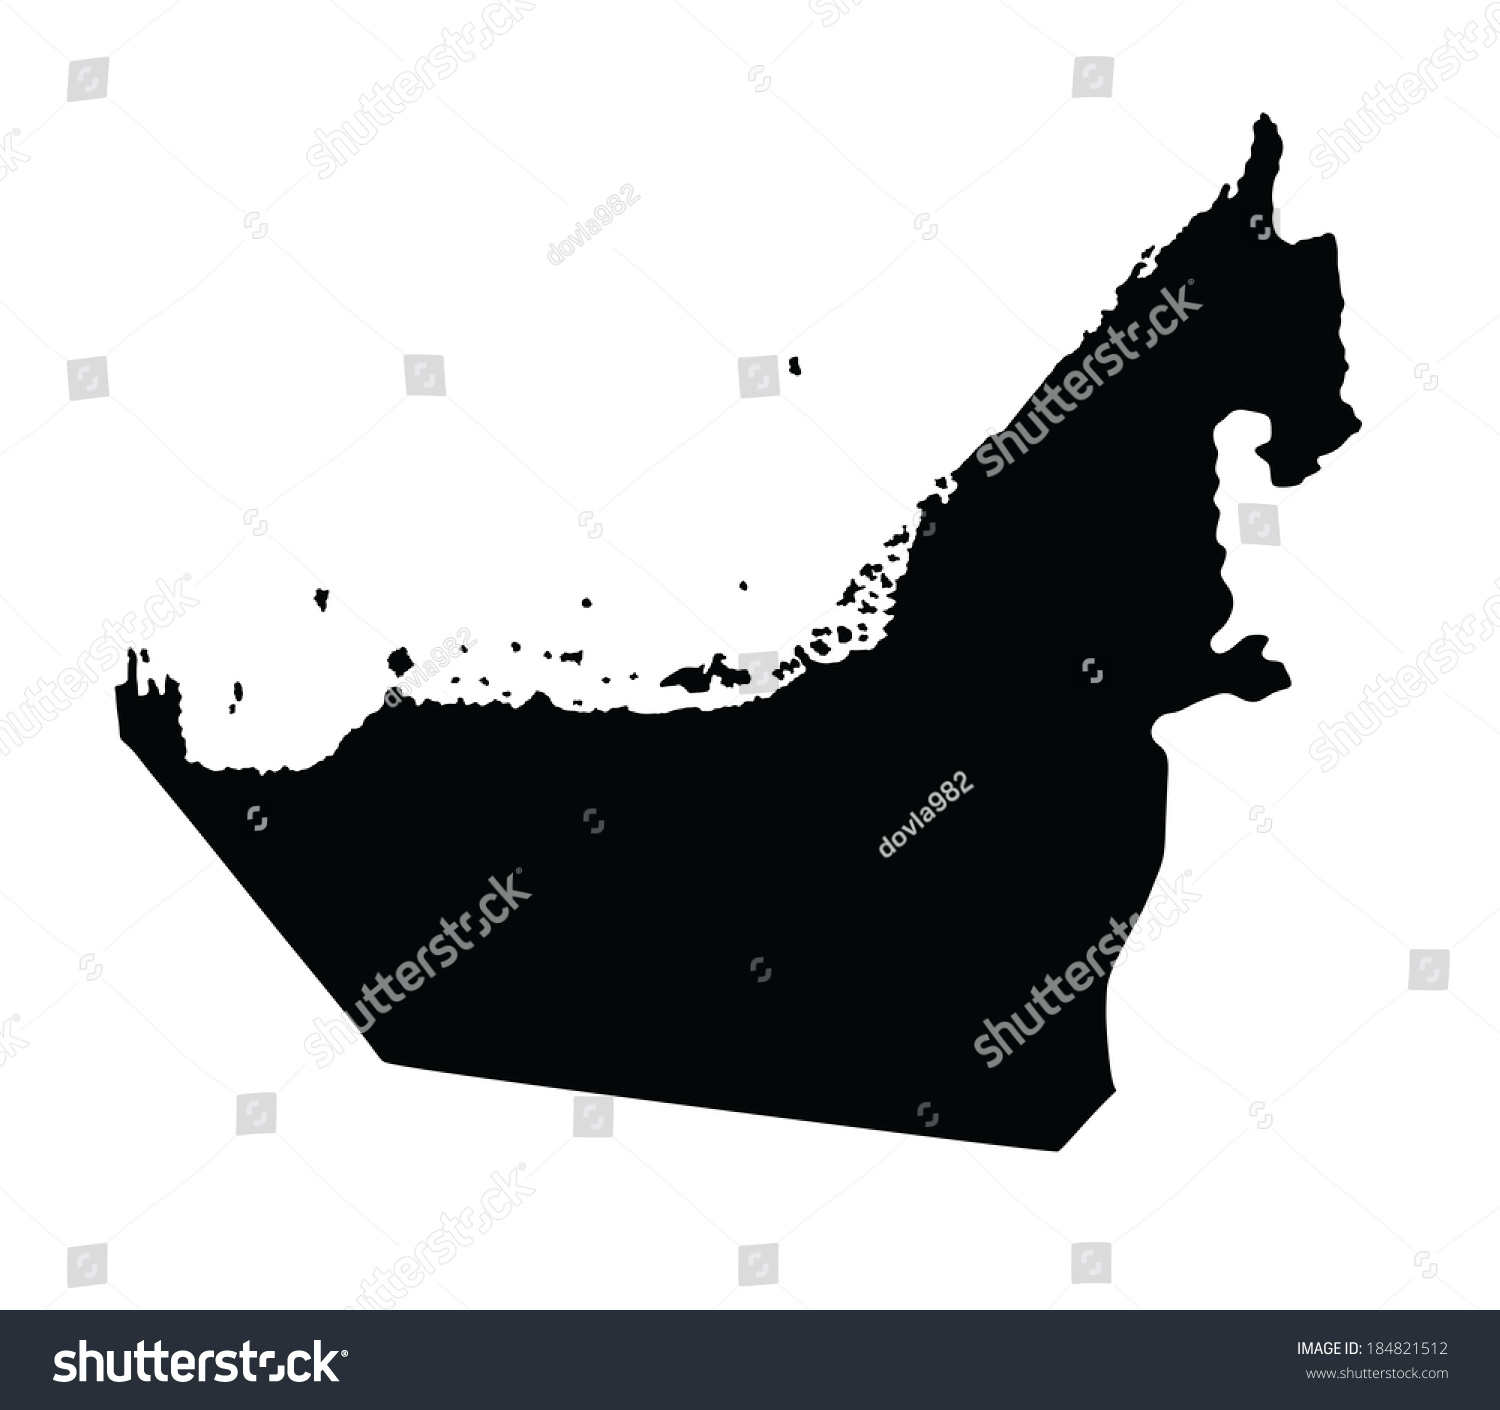 clipart of uae map - photo #33